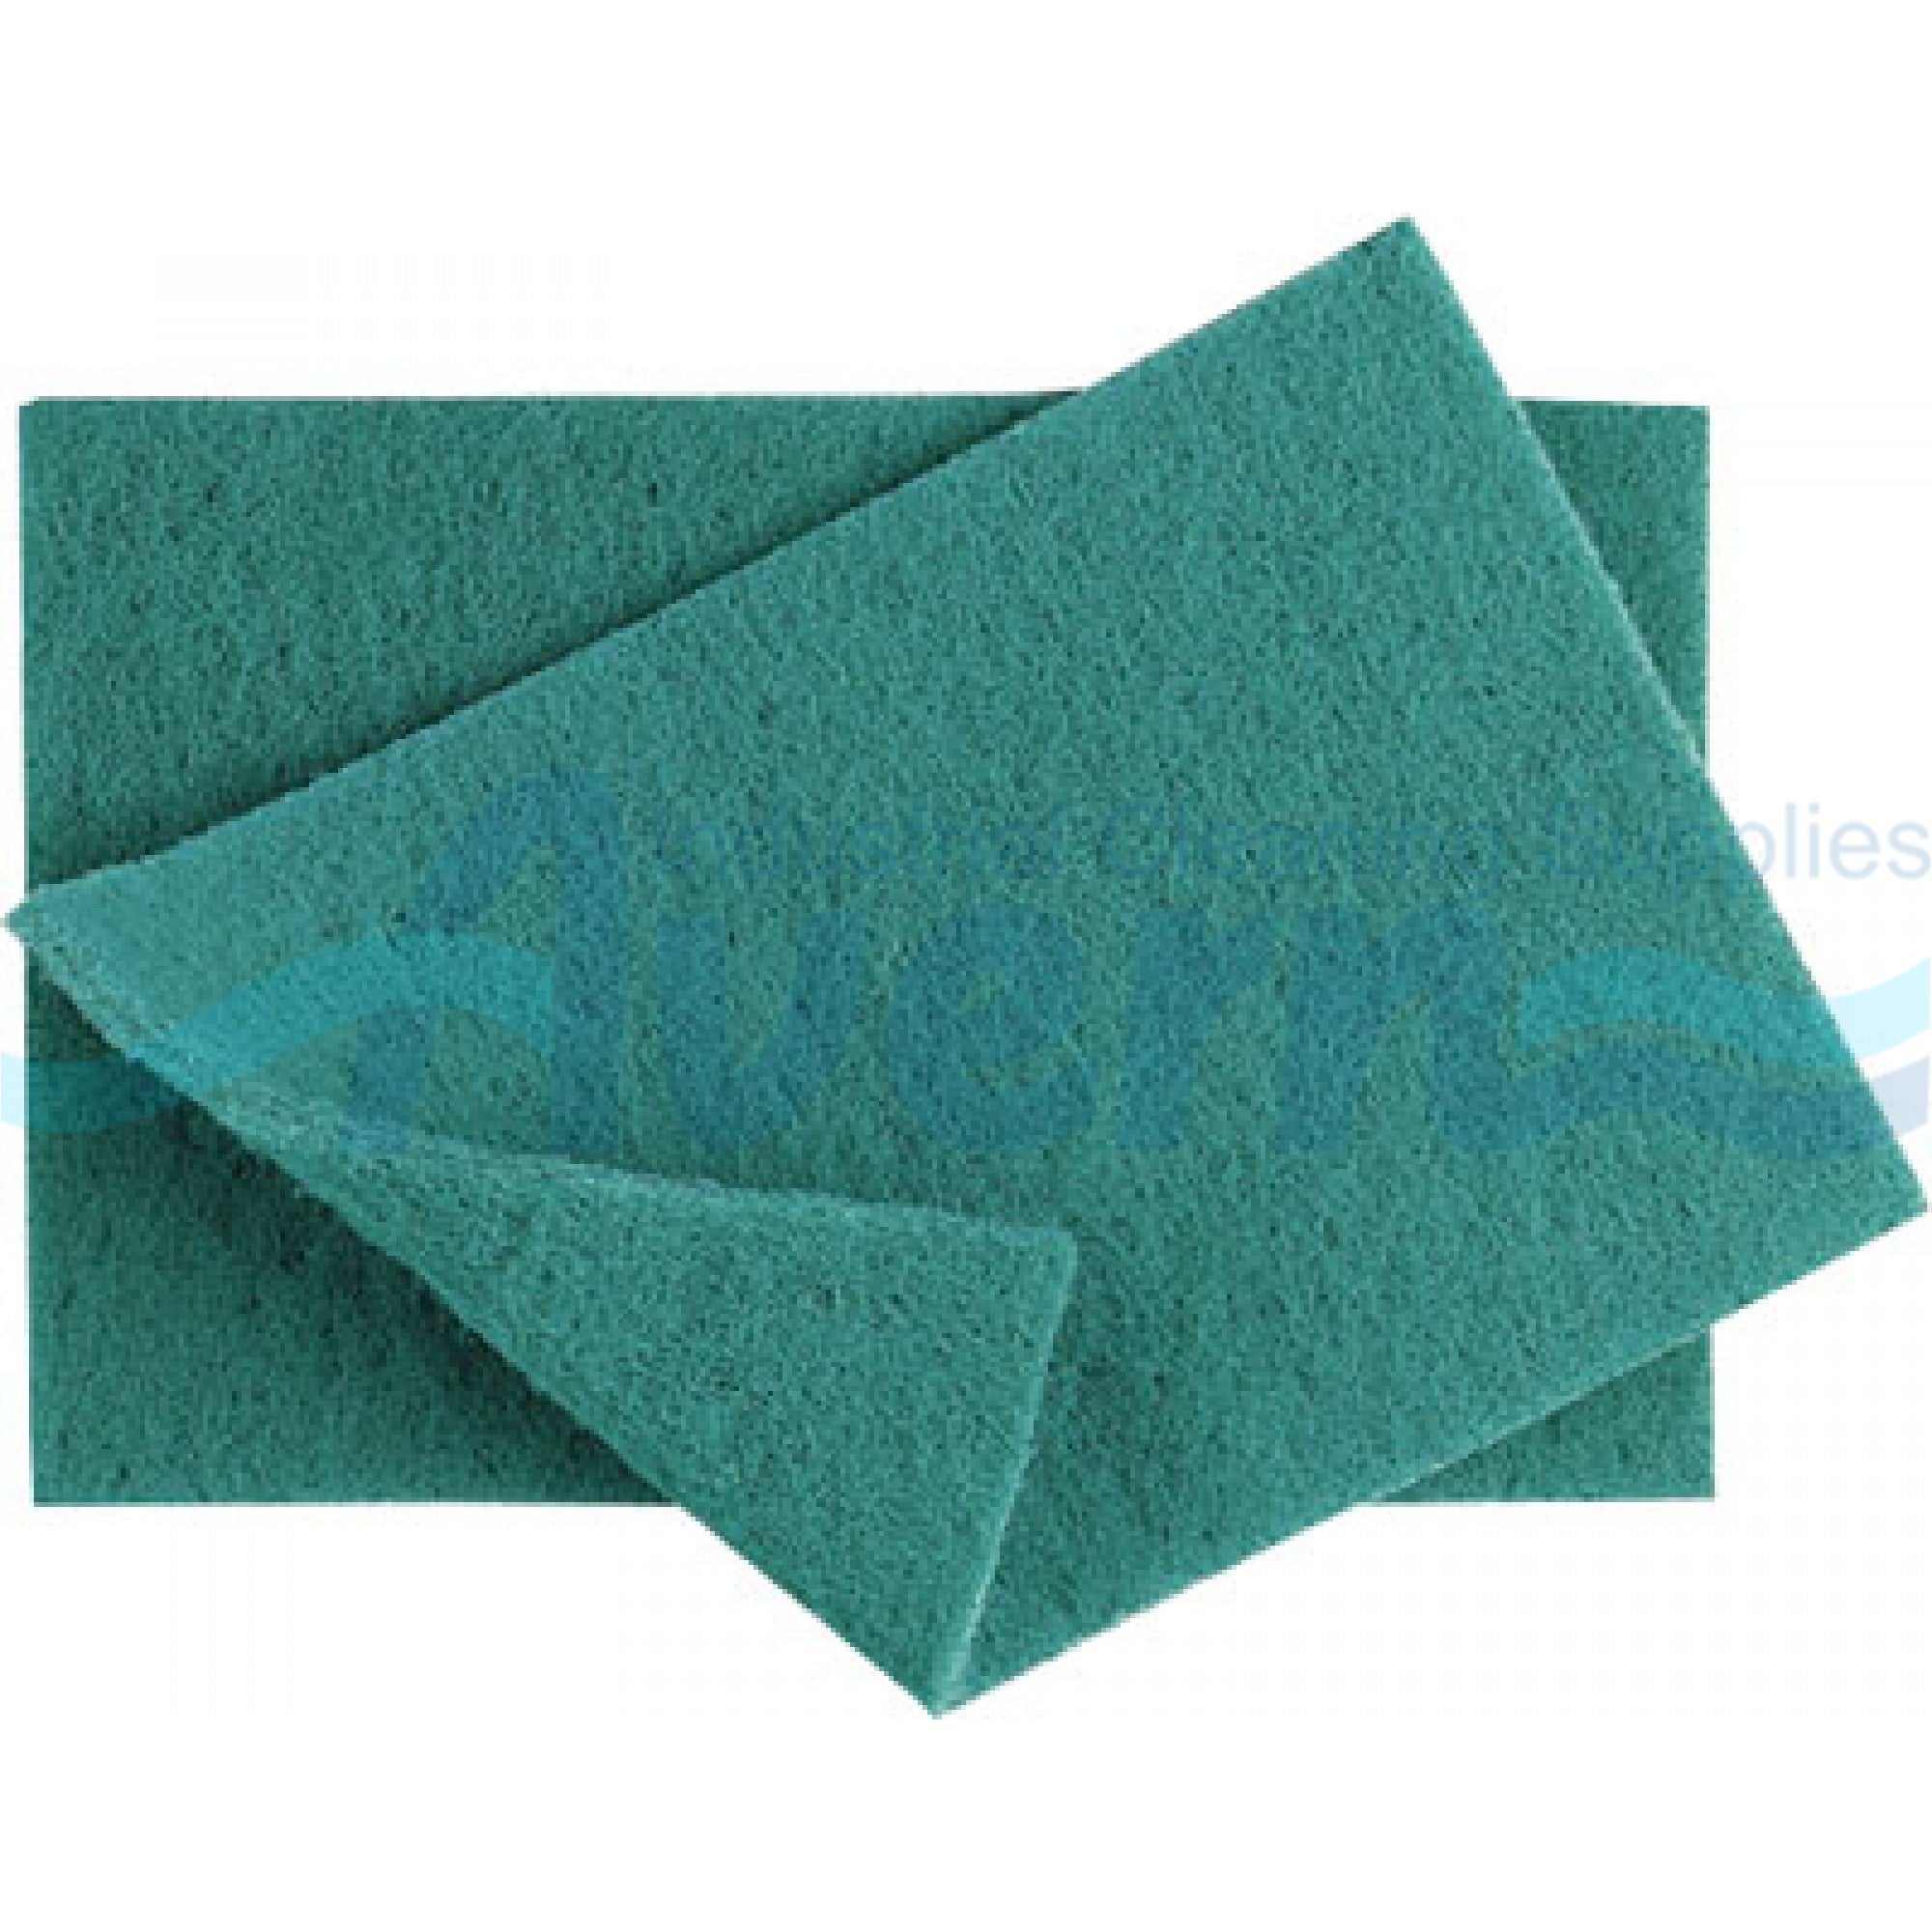 Green Scouring Pads, 60 per case - Thebestpartydeals